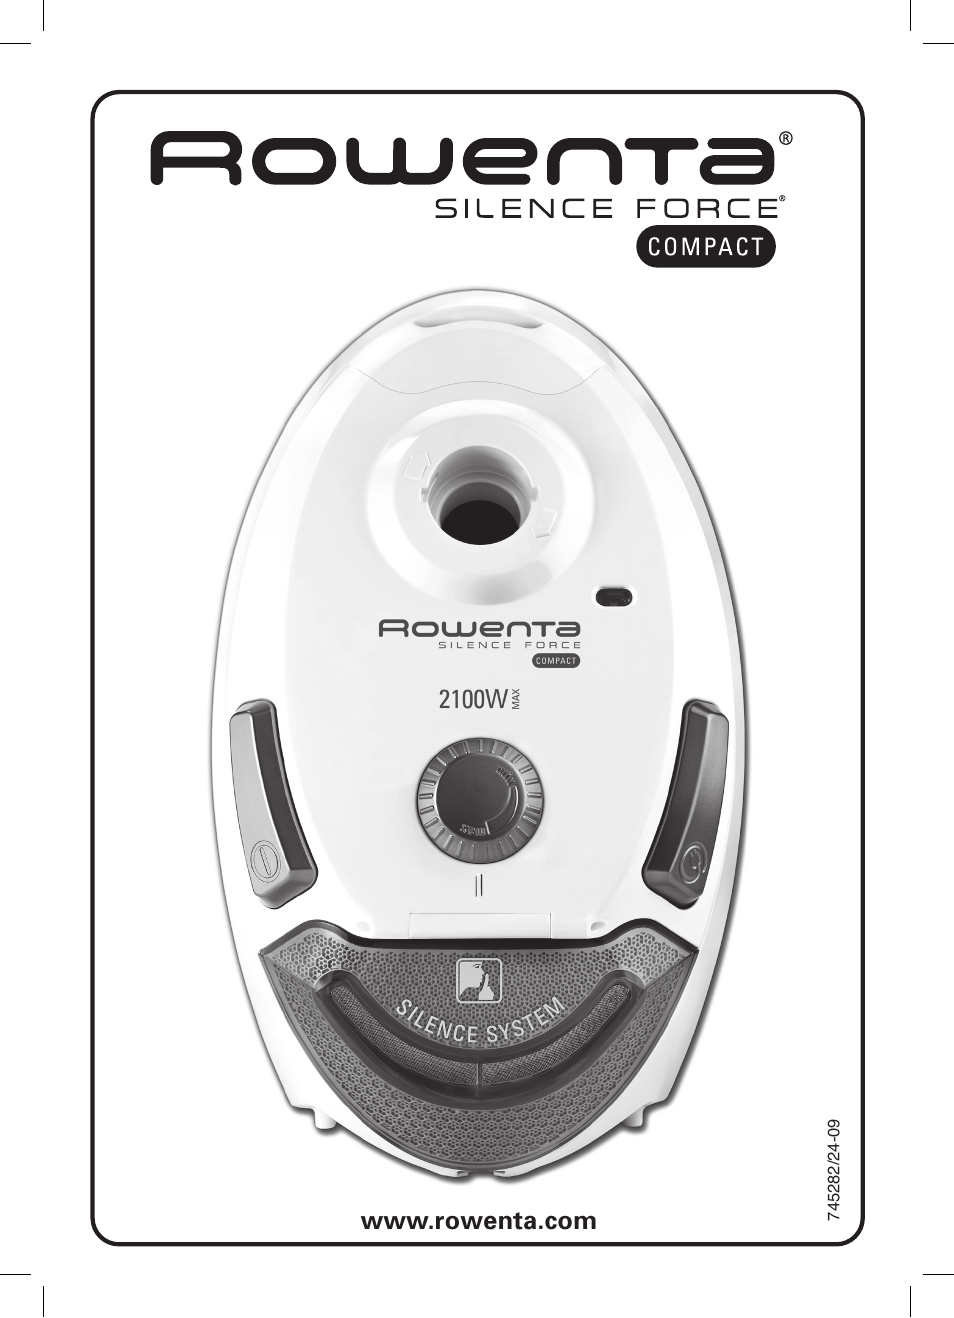 ROWENTA SILENCE FORCE COMPACT RO4449 User Manual | 46 pages